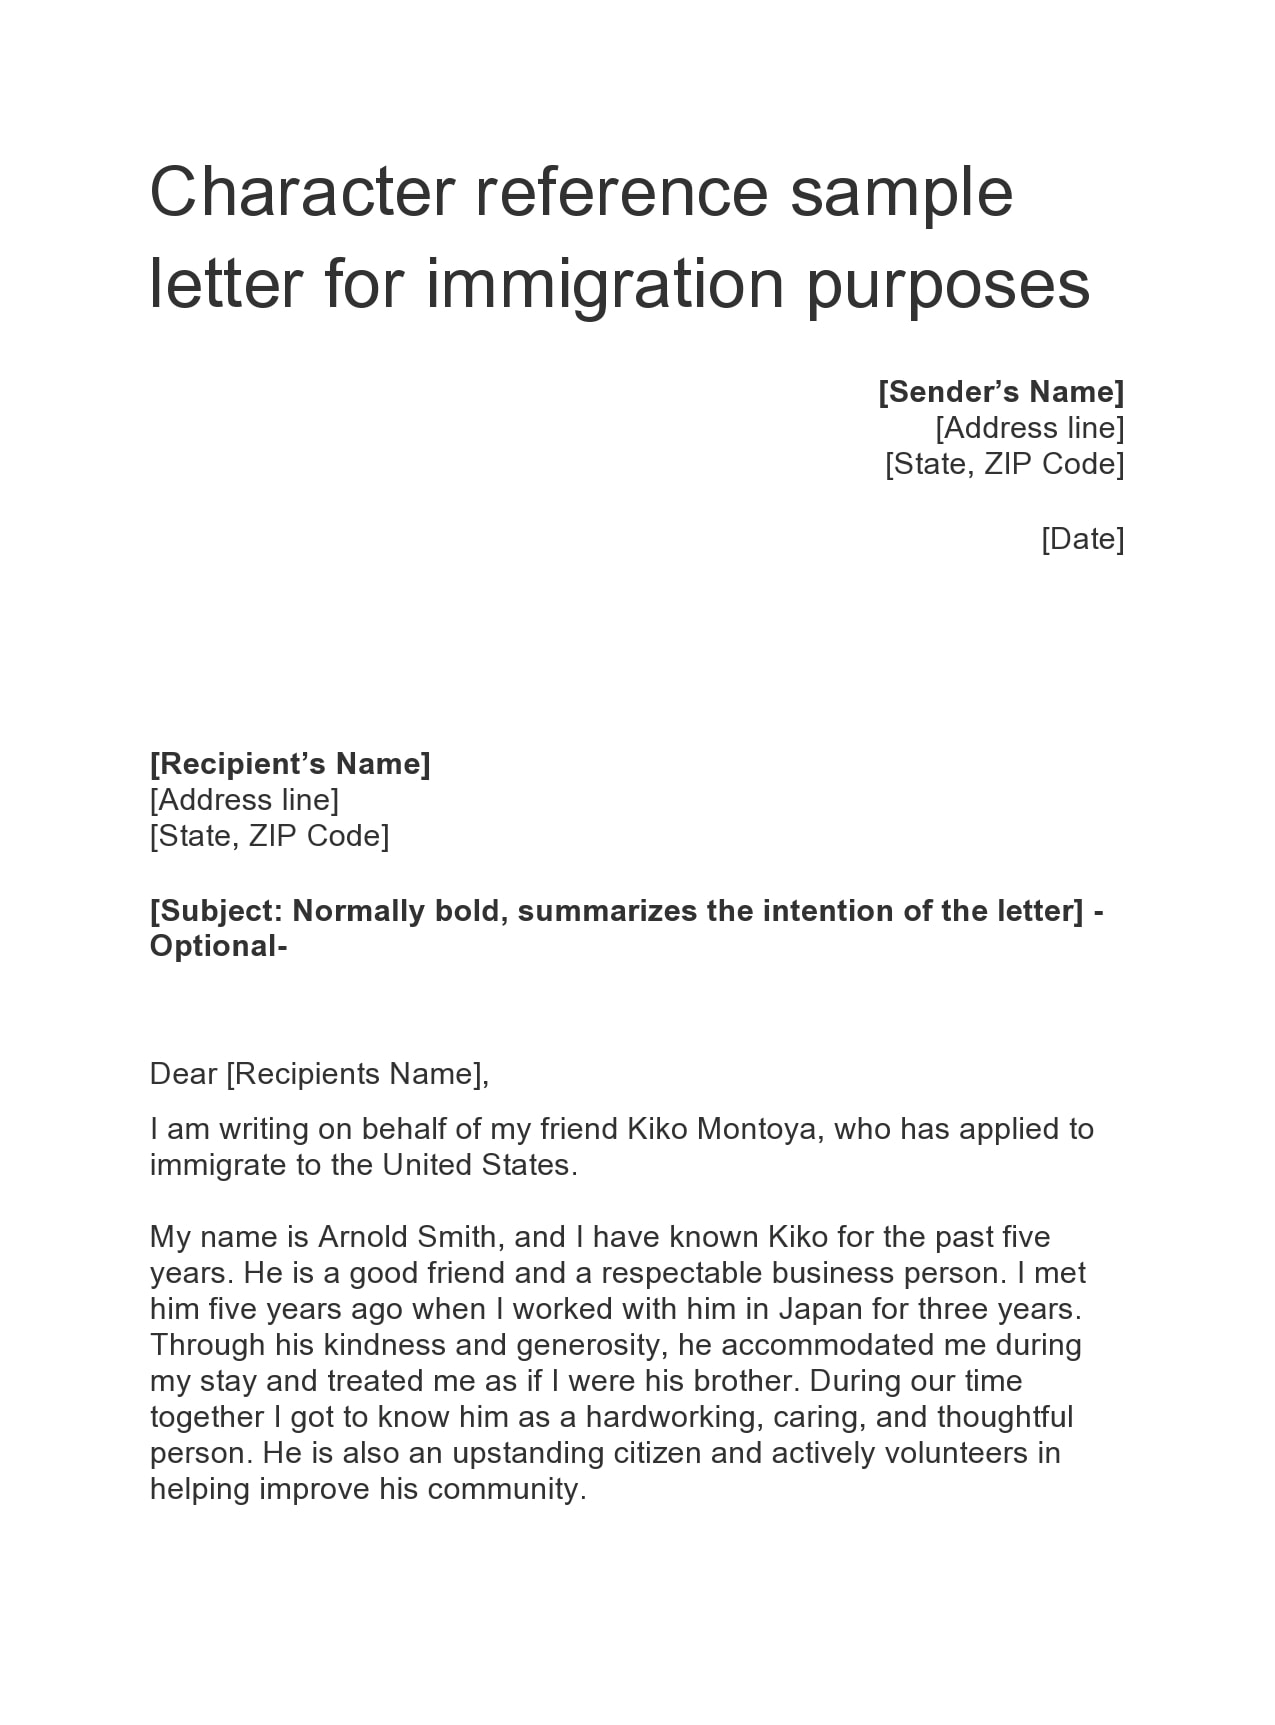 15 Best Reference Letter For Immigration Samples - TemplateArchive